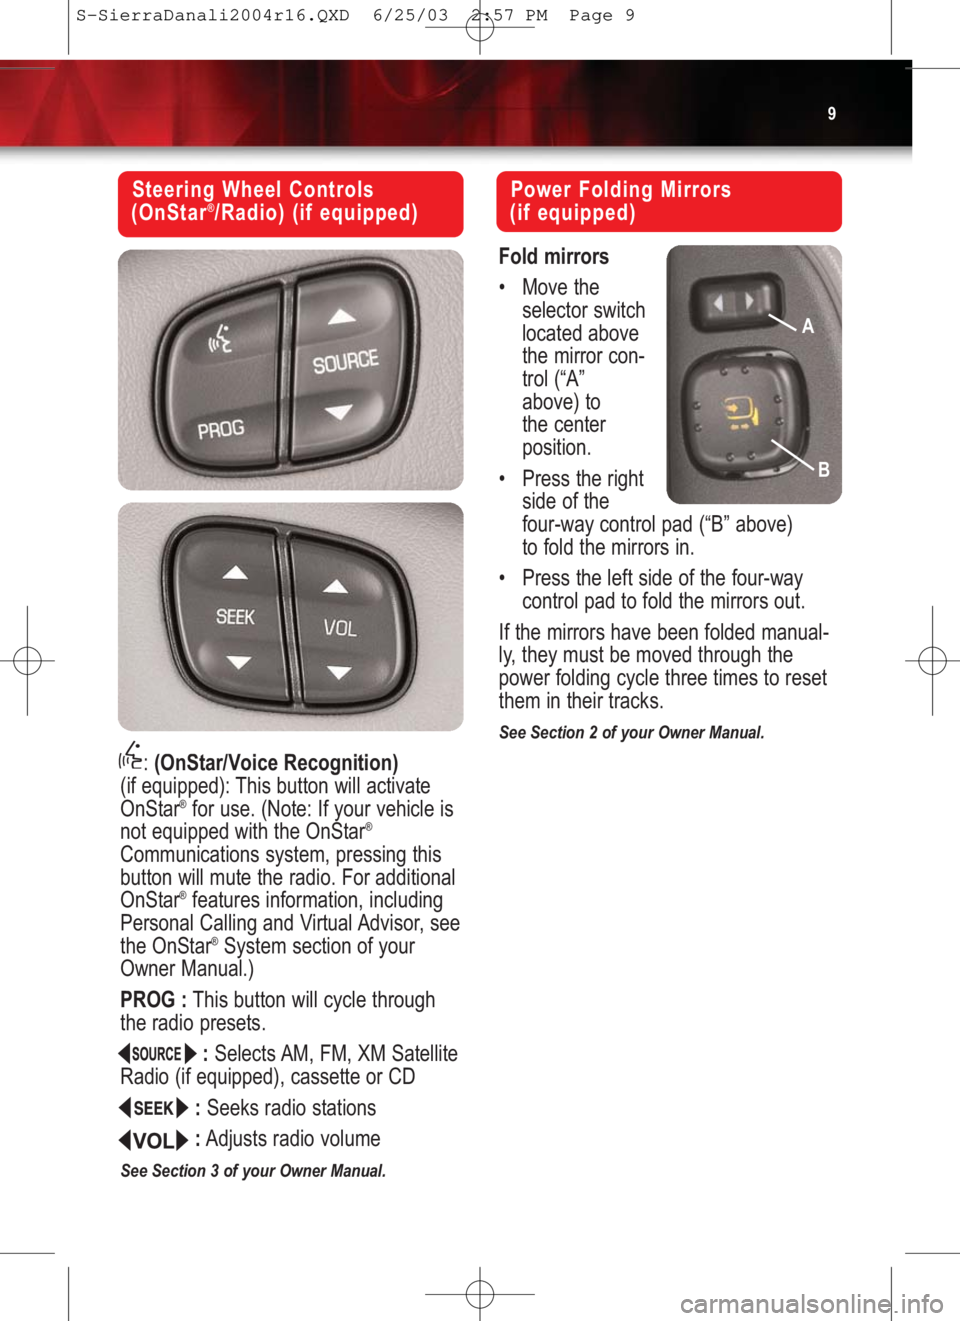 GMC SIERRA 2004  Get To Know Guide 9
Steering Wheel Controls
(OnStar®/Radio) (if equipped)
: (OnStar/Voice Recognition) 
(if equipped): This button will activate
OnStar
®for use. (Note: If your vehicle is
not equipped with the OnStar